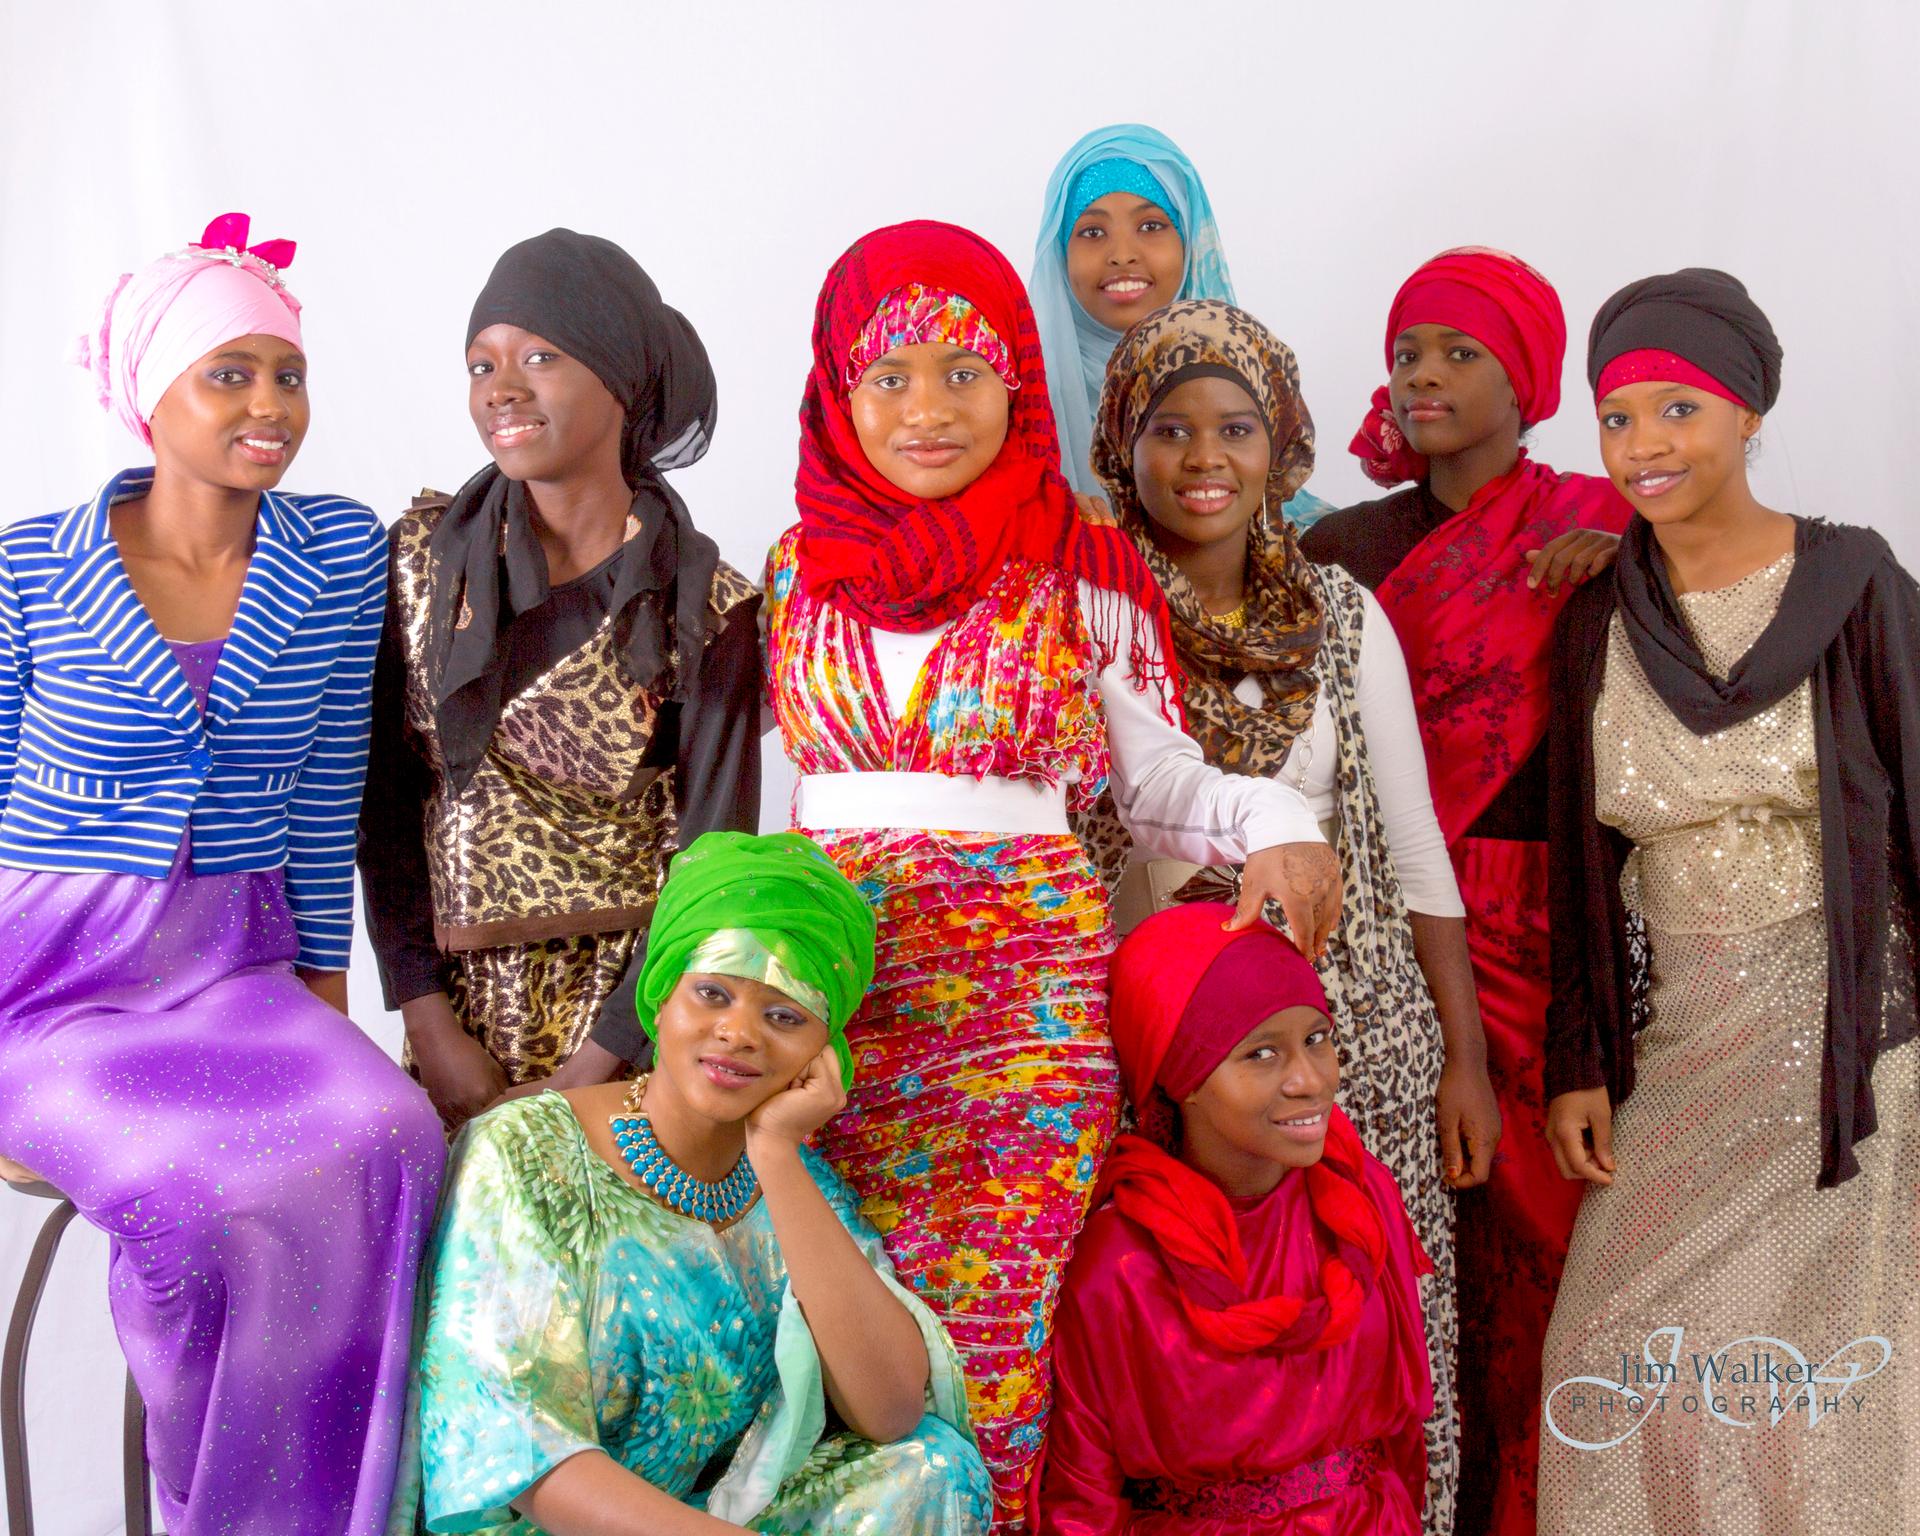 Sahro Hassan (center) surrounded by friends and family modeling her designs.